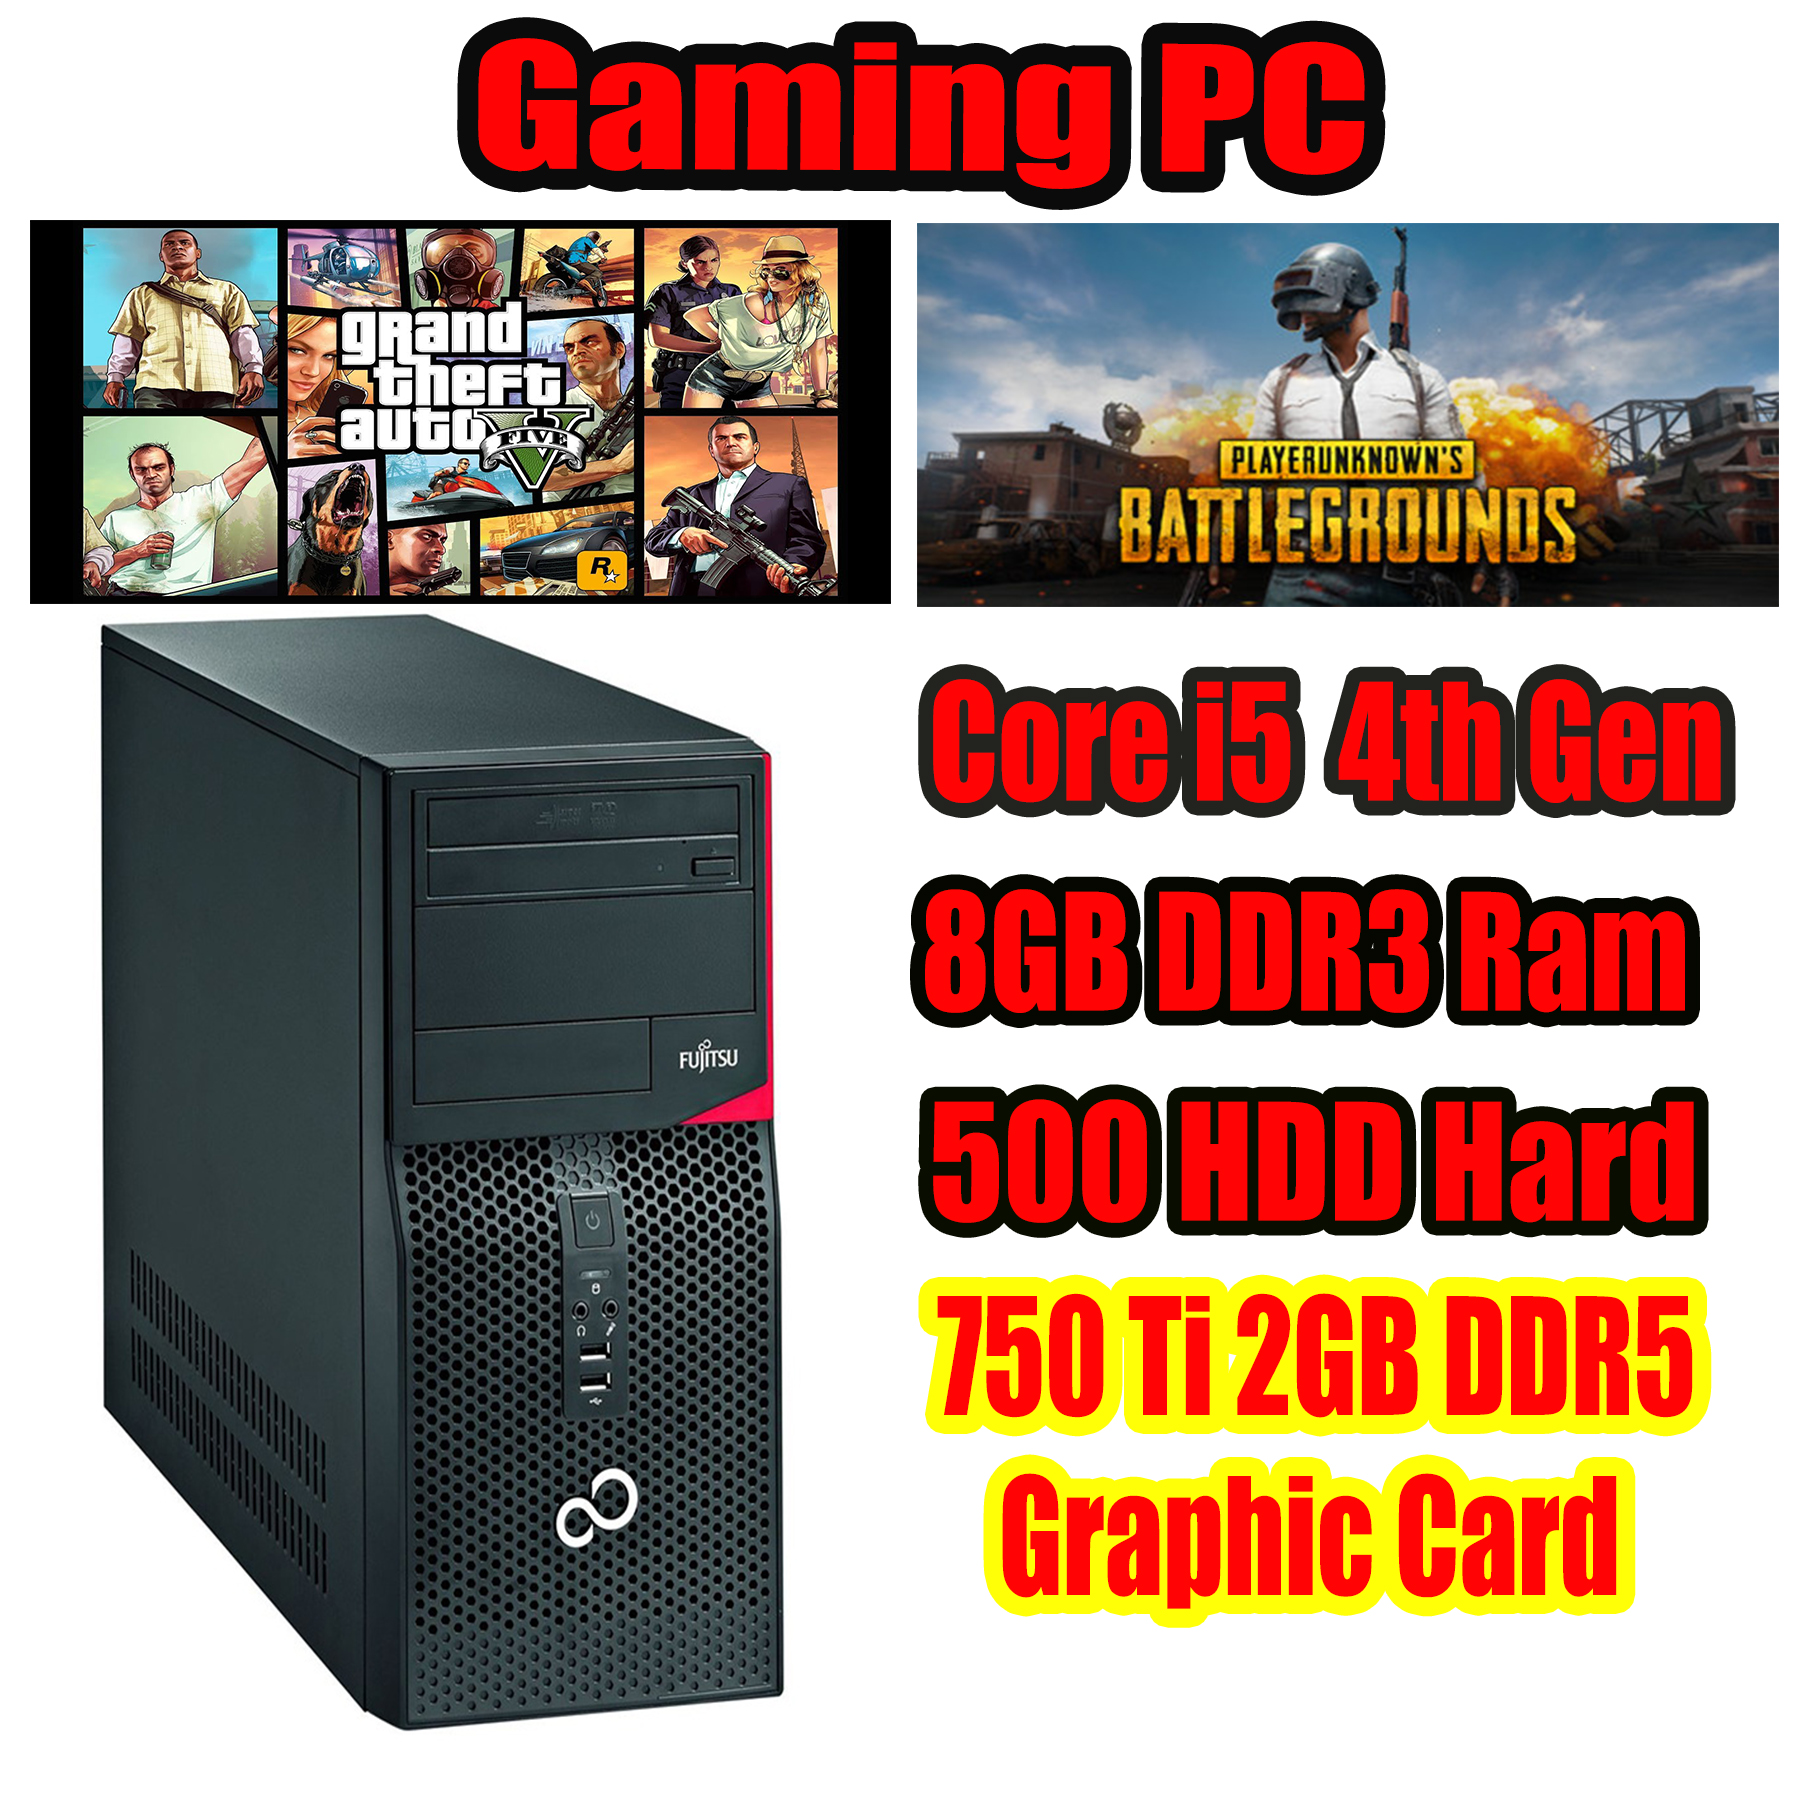 Renewed Fujitsu Tower Core I5 4th Gen 8gb Ram 500gb Hdd Gaming Pc With Gtx 750ti 2gb Ddr5 128bit Dedicated Graphics Card Buy Online At Best Prices In Pakistan Daraz Pk